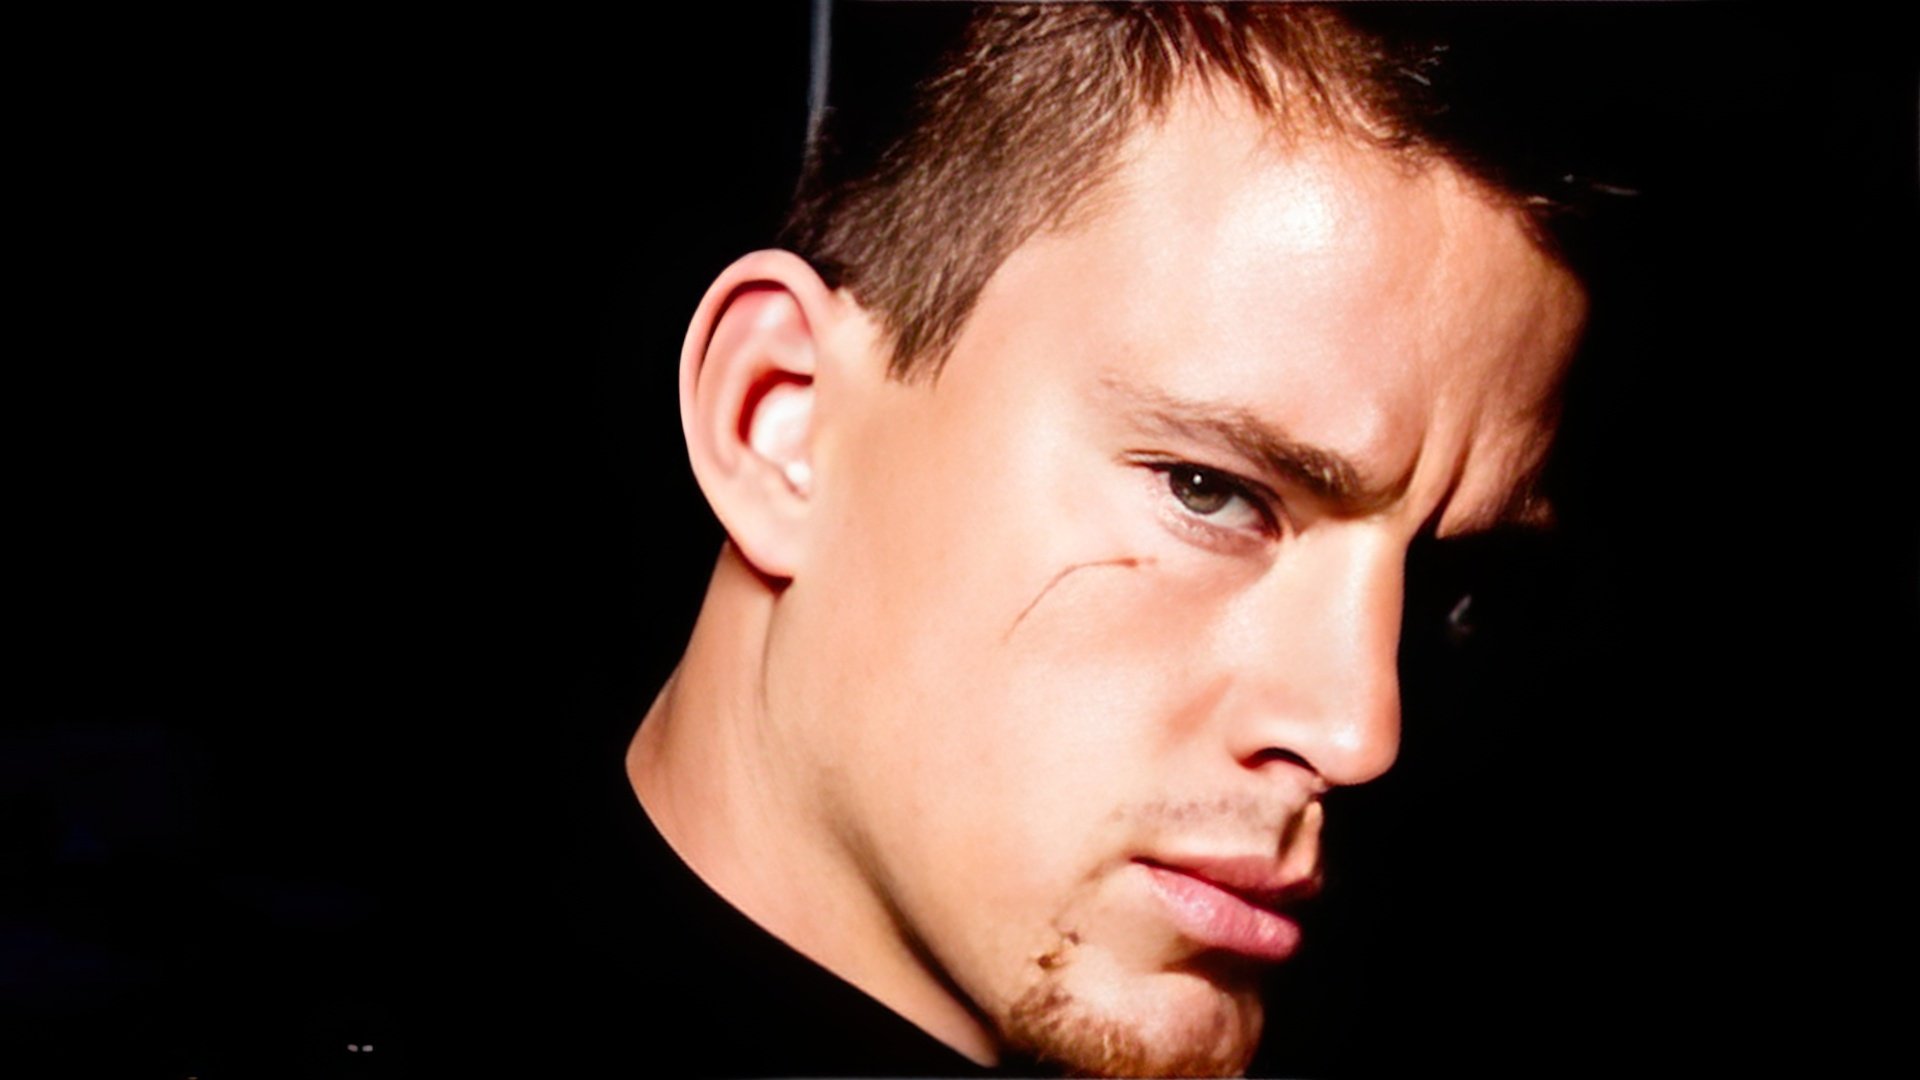 'G.I. Joe: The Rise of Cobra' – one of the most famous films with Channing Tatum